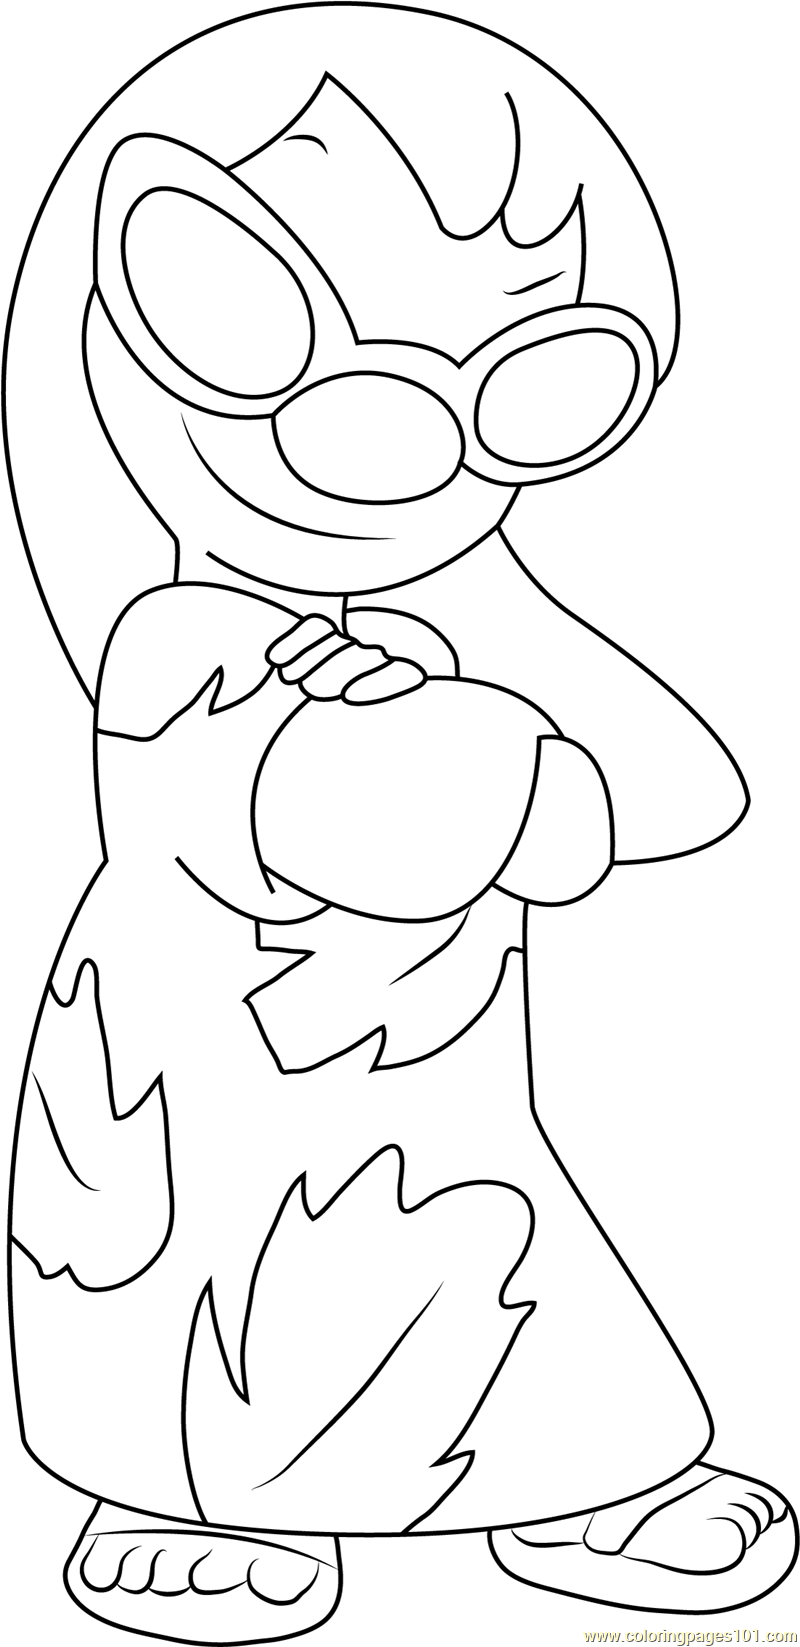 Lovely Lilo Coloring Page - Free Lilo & Stitch Coloring Pages